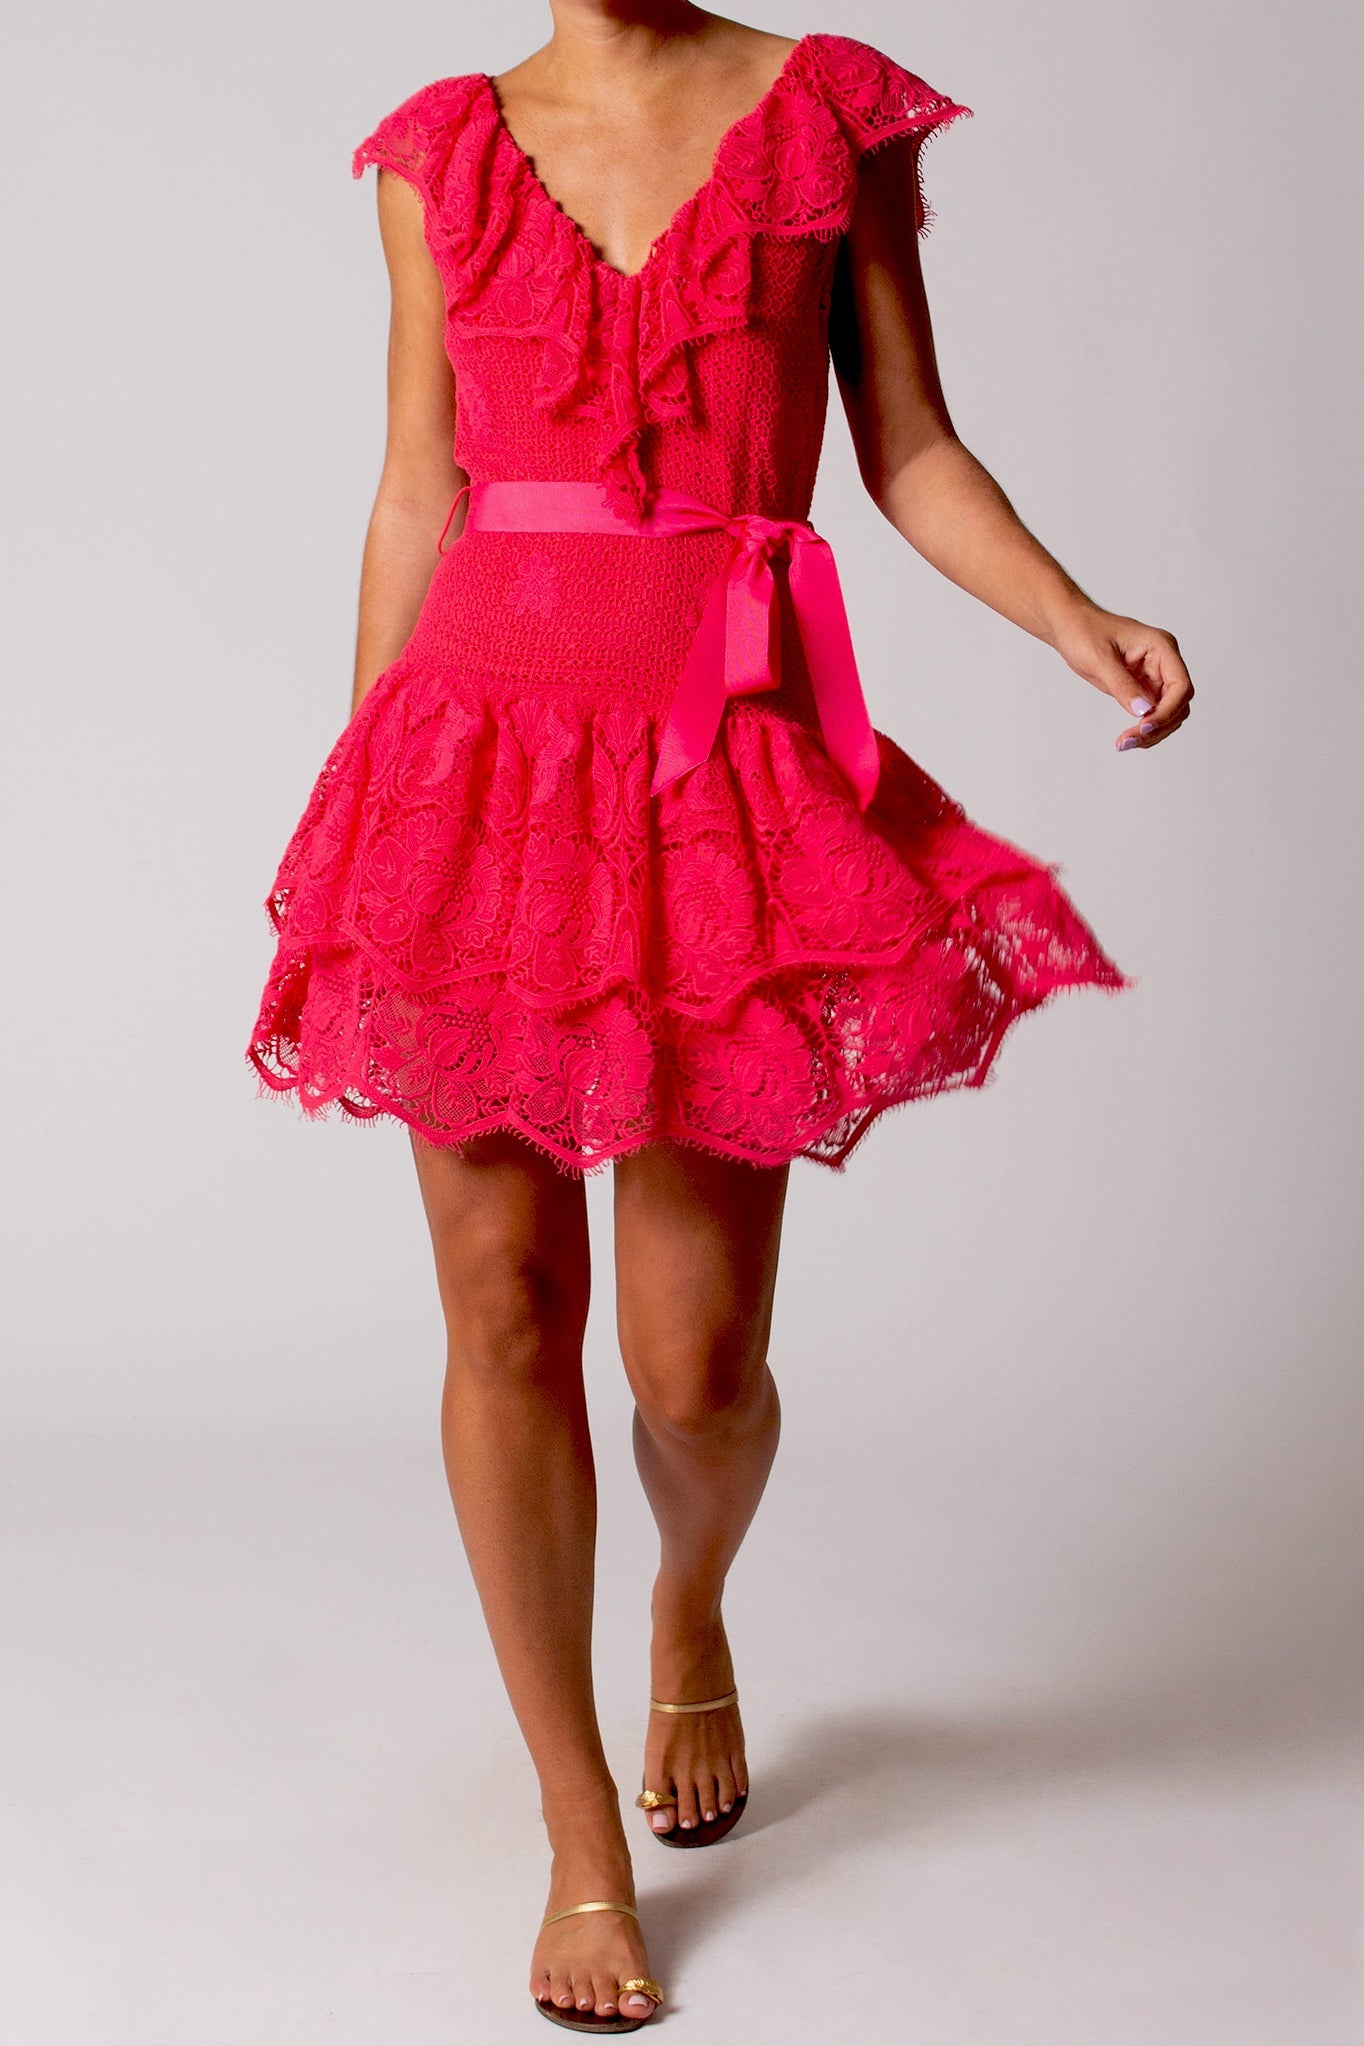 Coco Butterfly Scallop Mini Dress - Fiesta by Miguelina